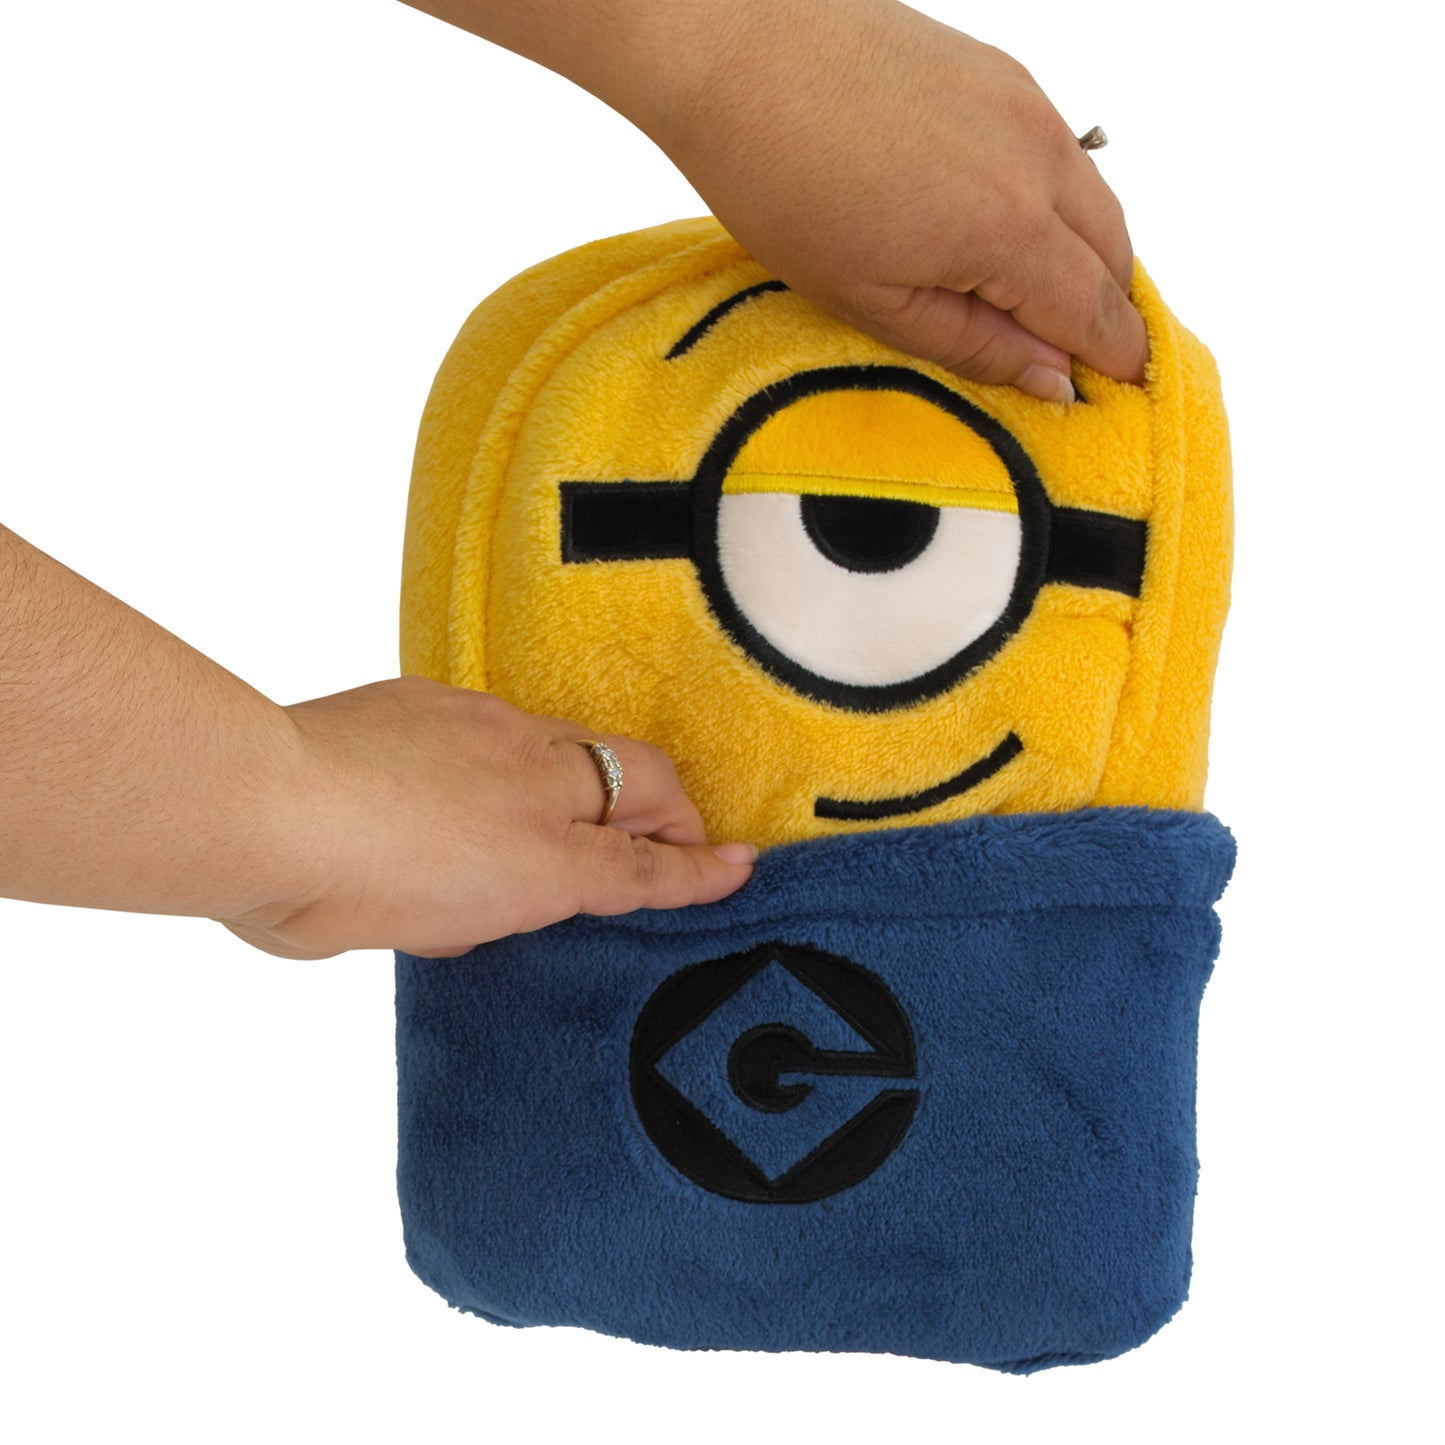 Illumination Lazy Minions Club Yellow, Blue and White, Minion Character Shaped Toddler Blanket